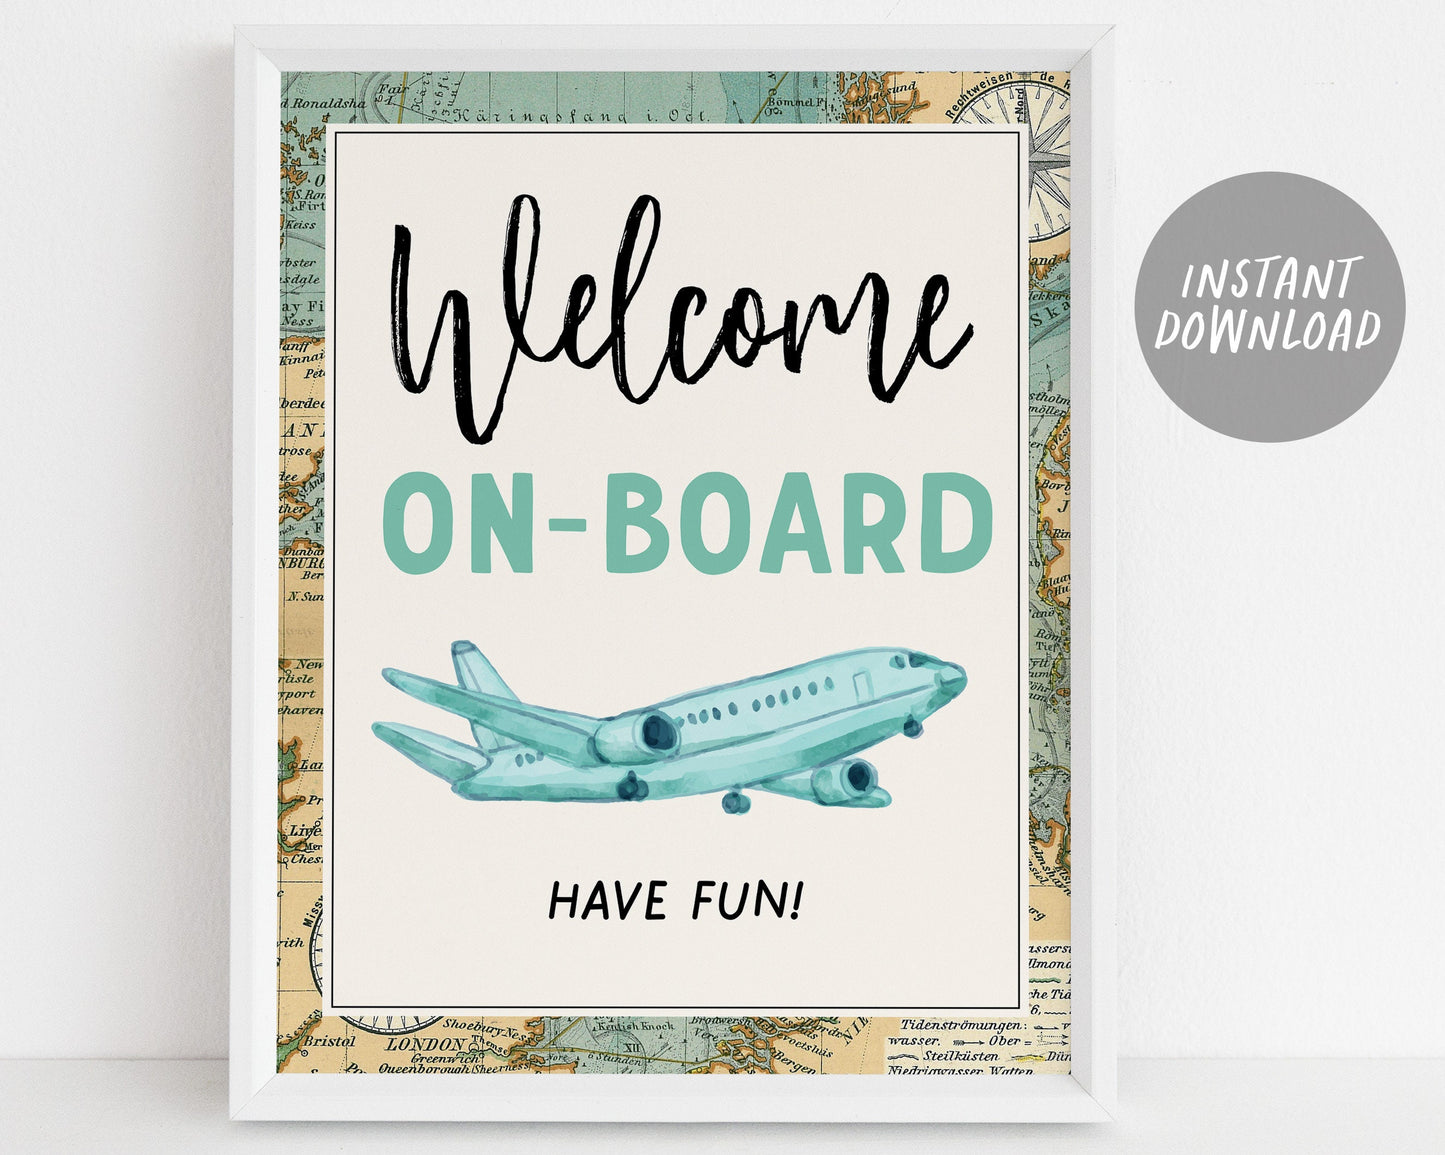 Airplane Travel Signs BUNDLE For Wedding Baby Shower Birthday, Airline Themed Birthday Table Decor, Around the World, Adventure Bridal